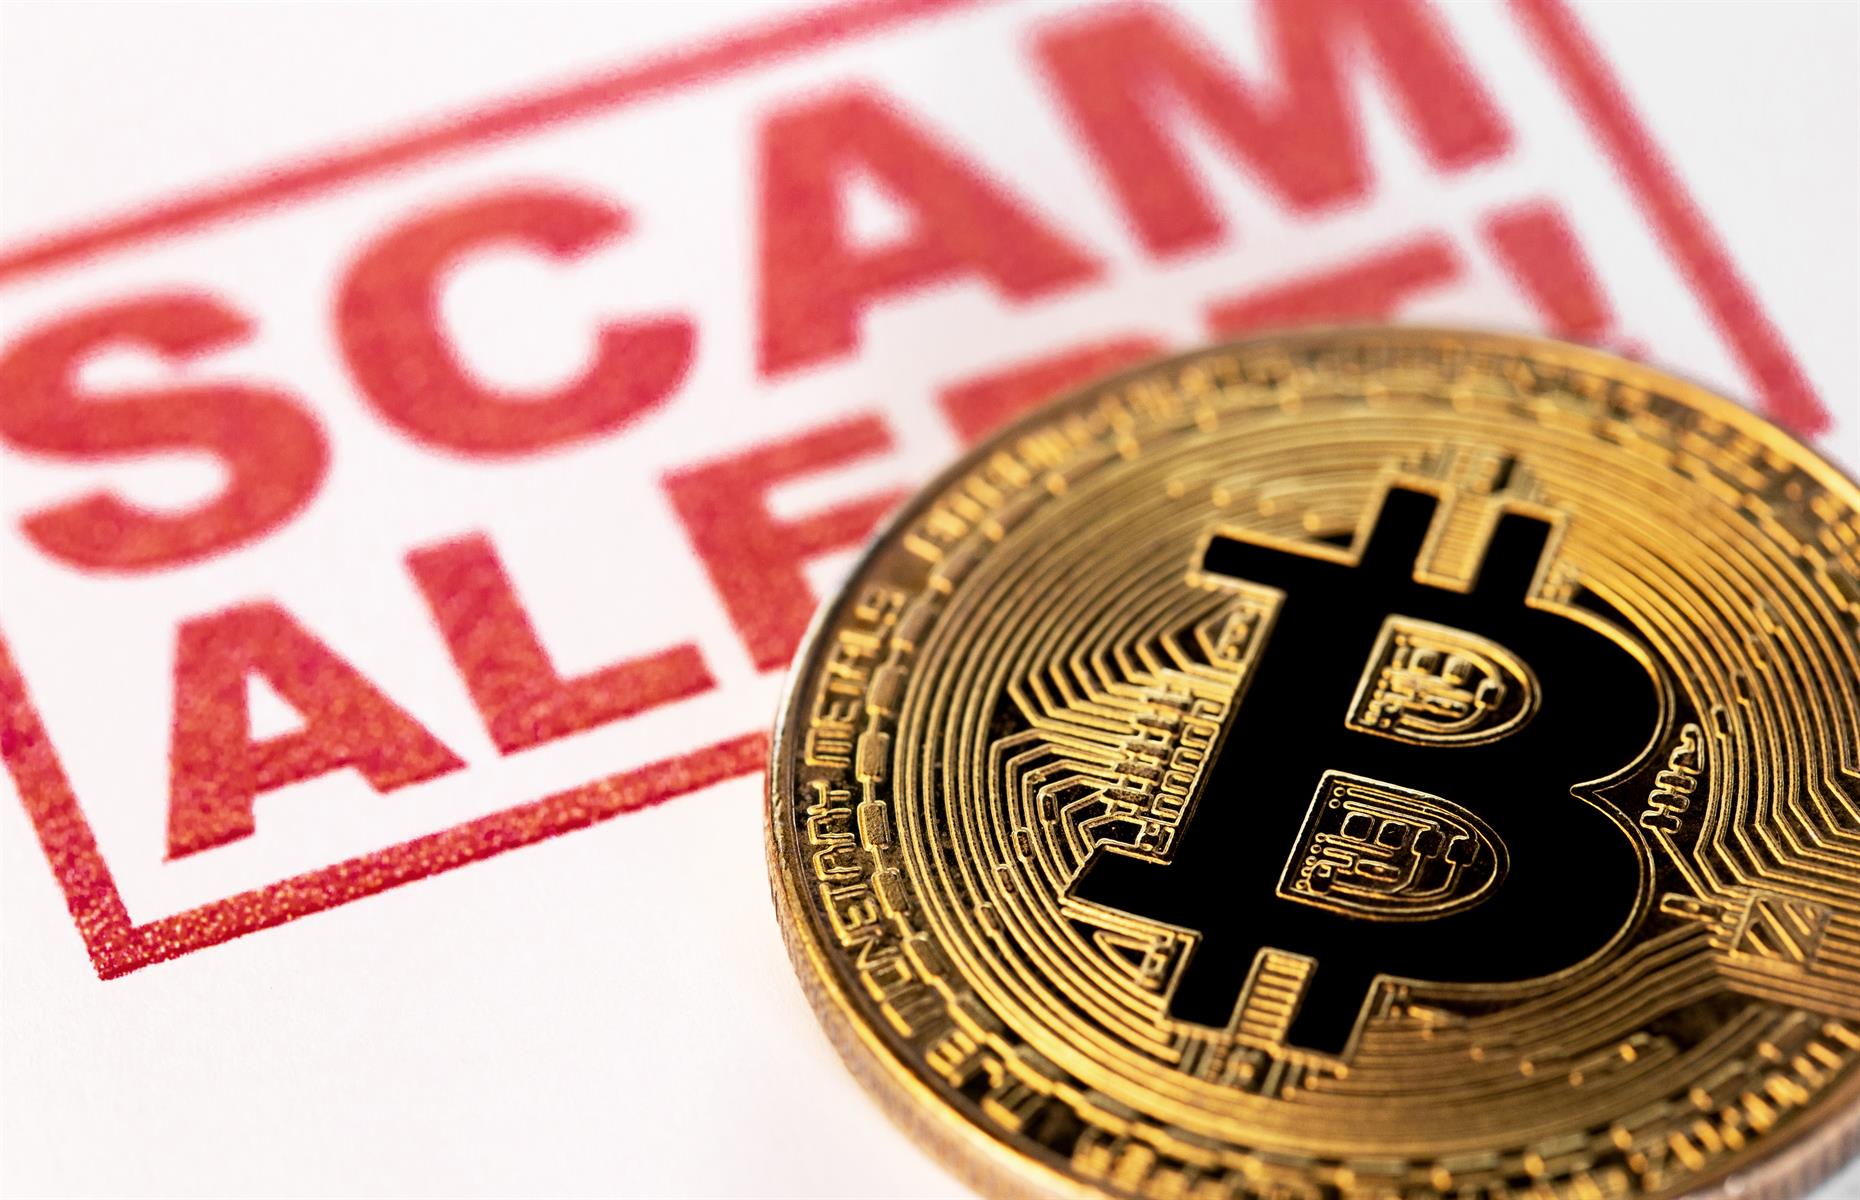 $1 billion has been lost in cryptocurrency scams since 2021